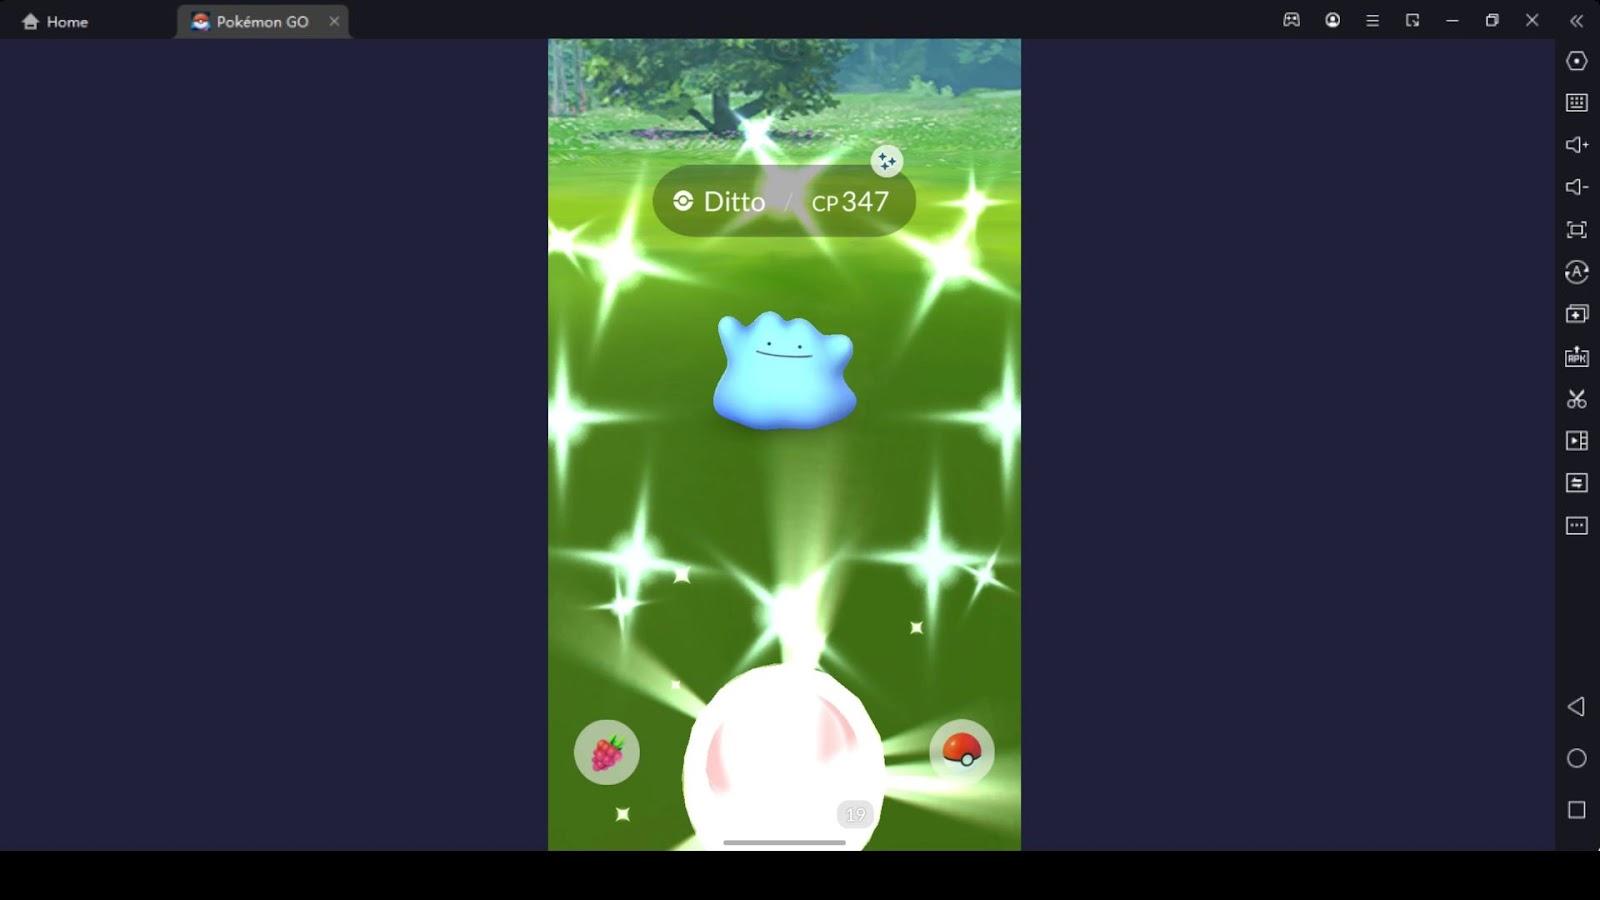 How Can You Have this Shiny Pokémon Go Ditto